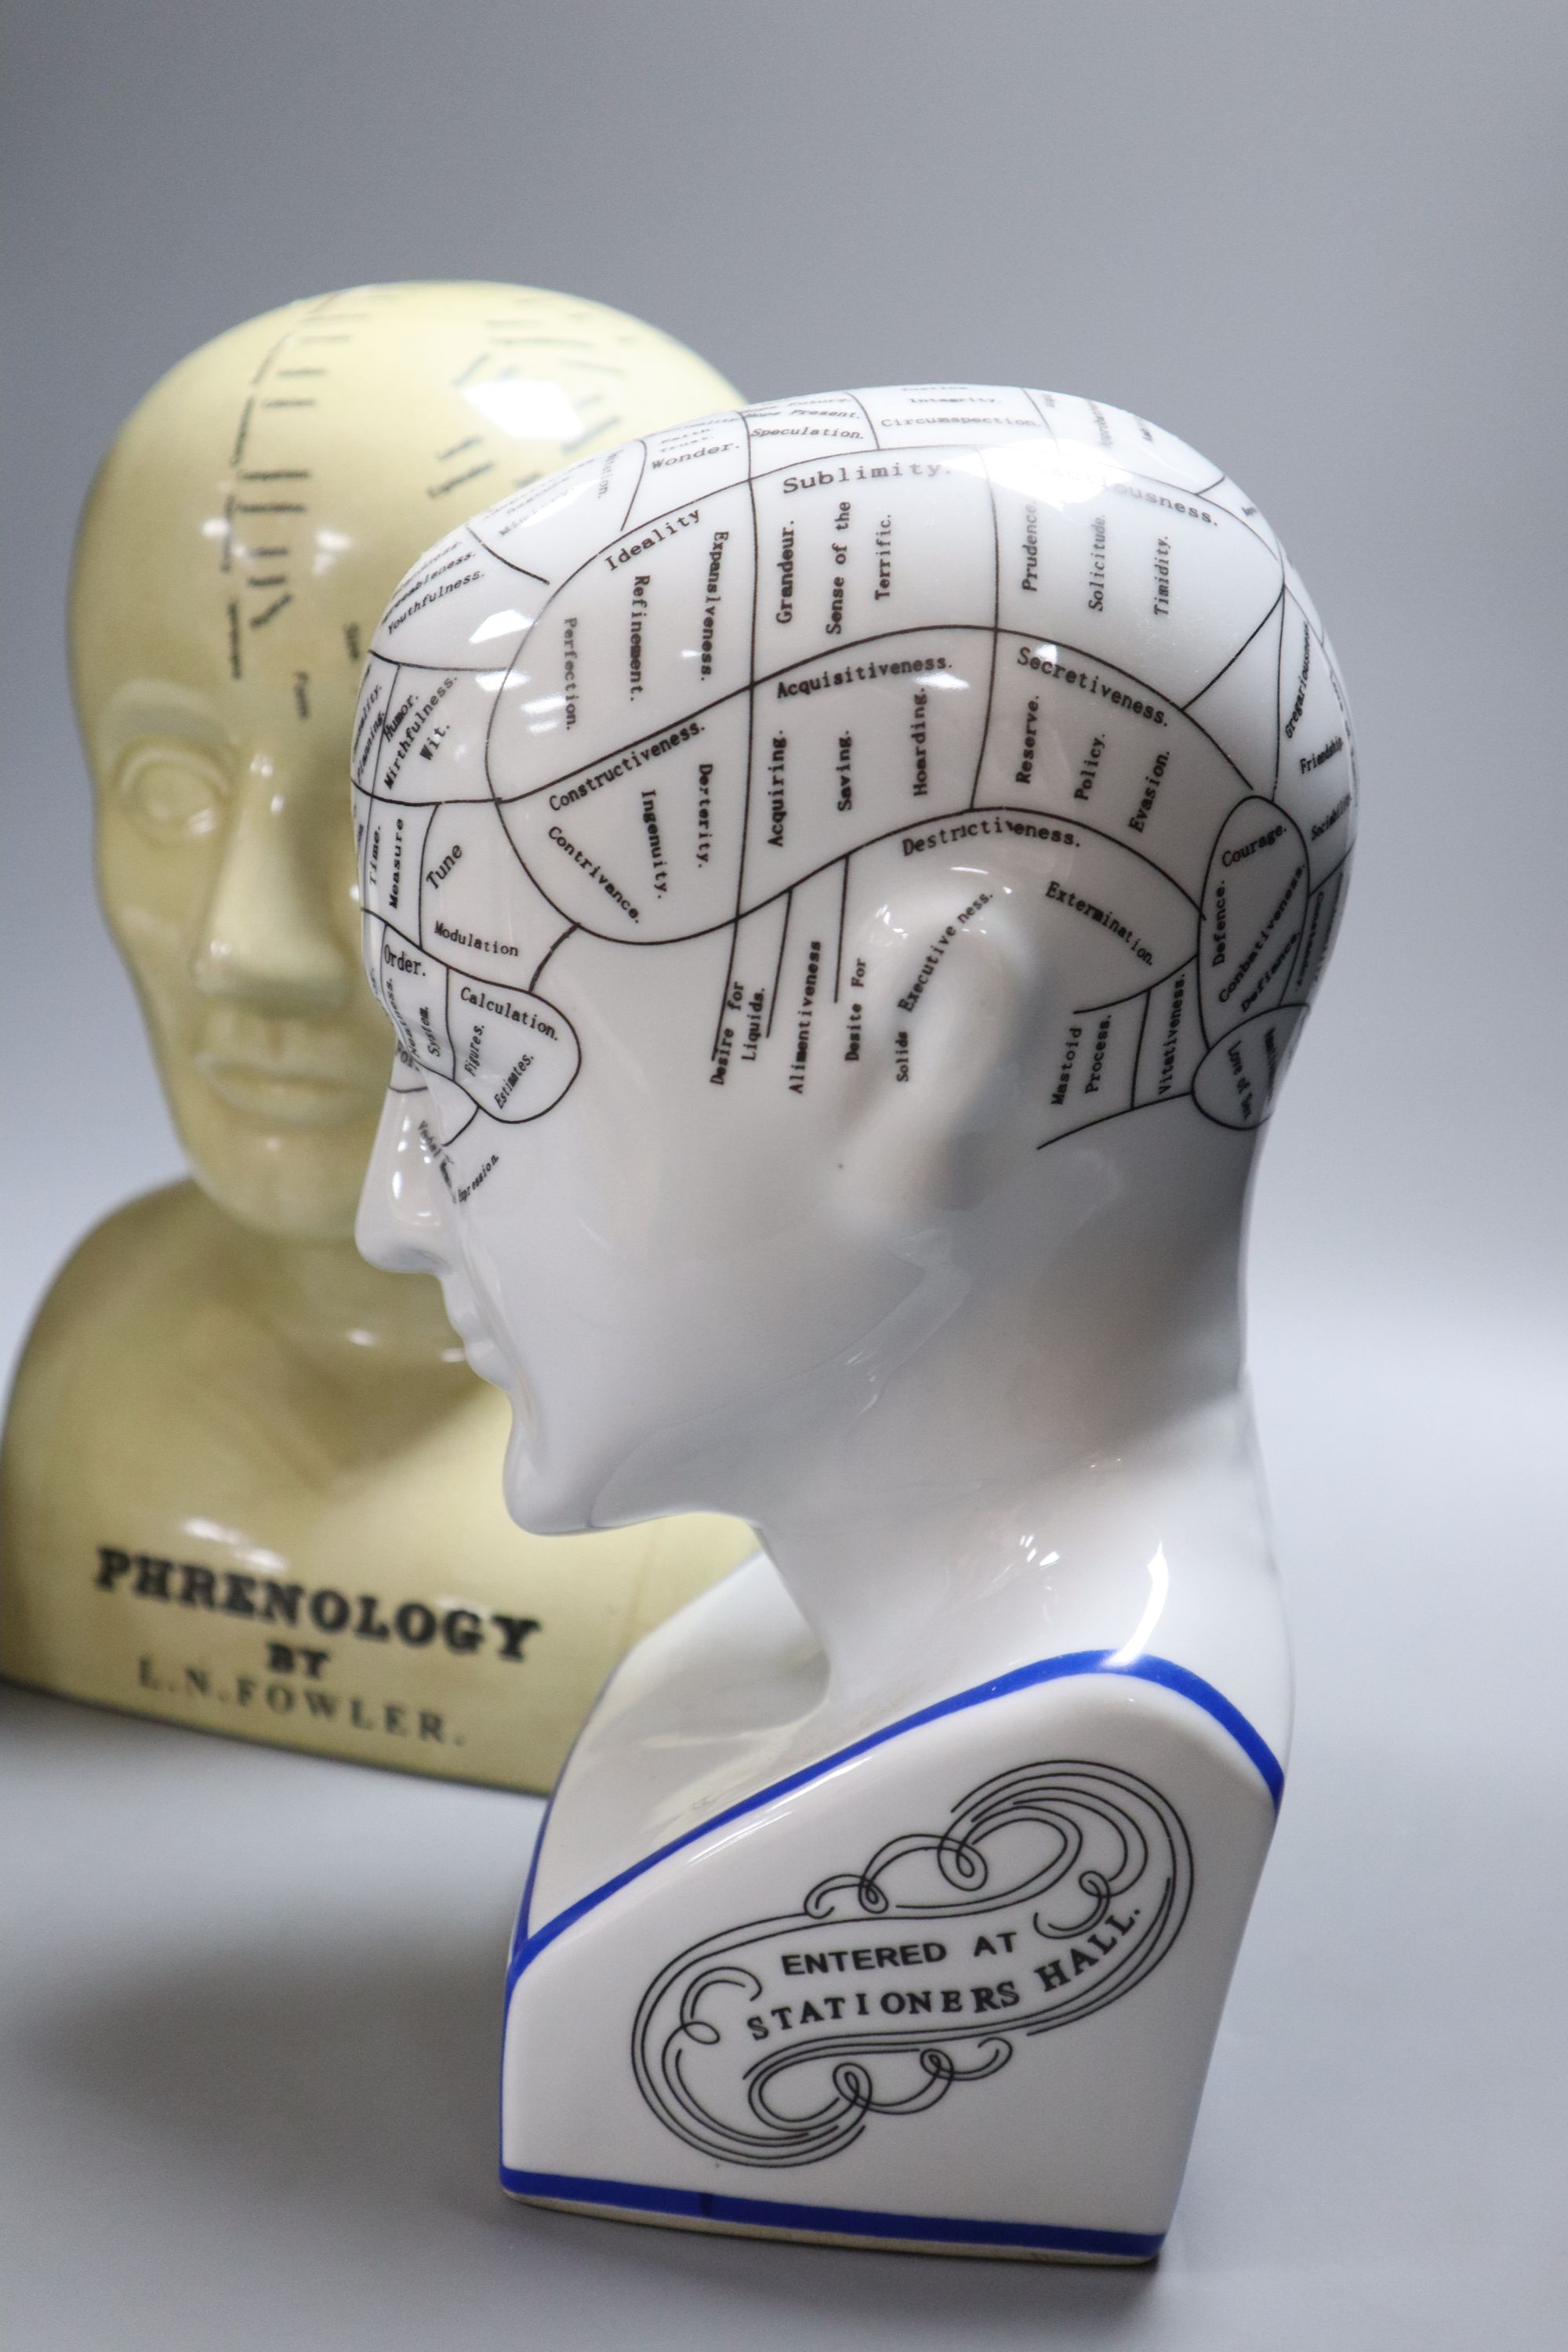 Three reproduction phrenology ceramic heads, by L.M. Fowler, tallest 29cm